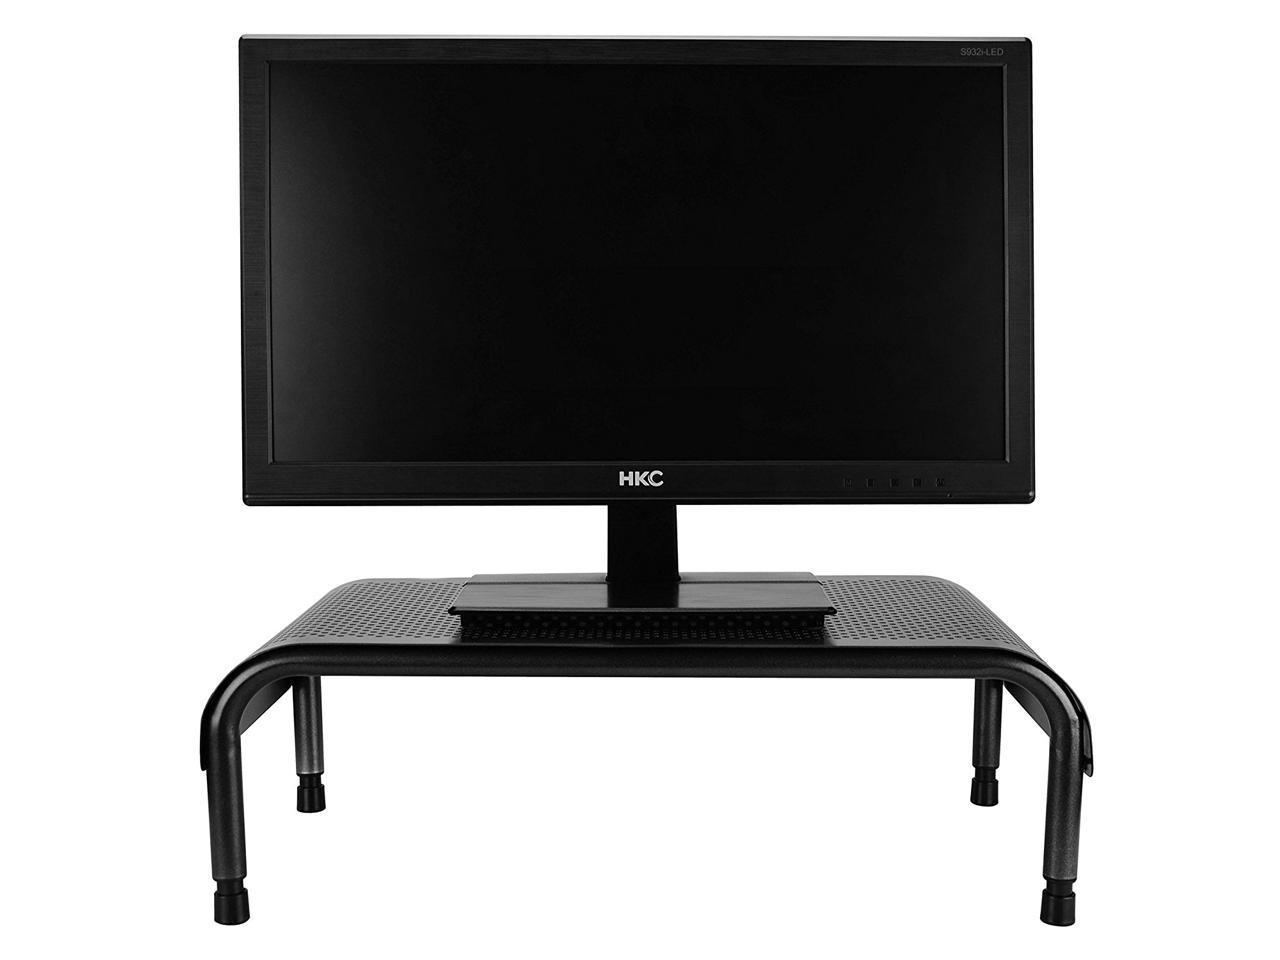 Easy Assemble for Computer PC Monitor 15 in x 10 in x 6 in TV Laptop 22004 - Black H: 6, 7, 8 XtremPro Metal Monitor Stand 3 Height Levels Adjustable w/Micro Leg